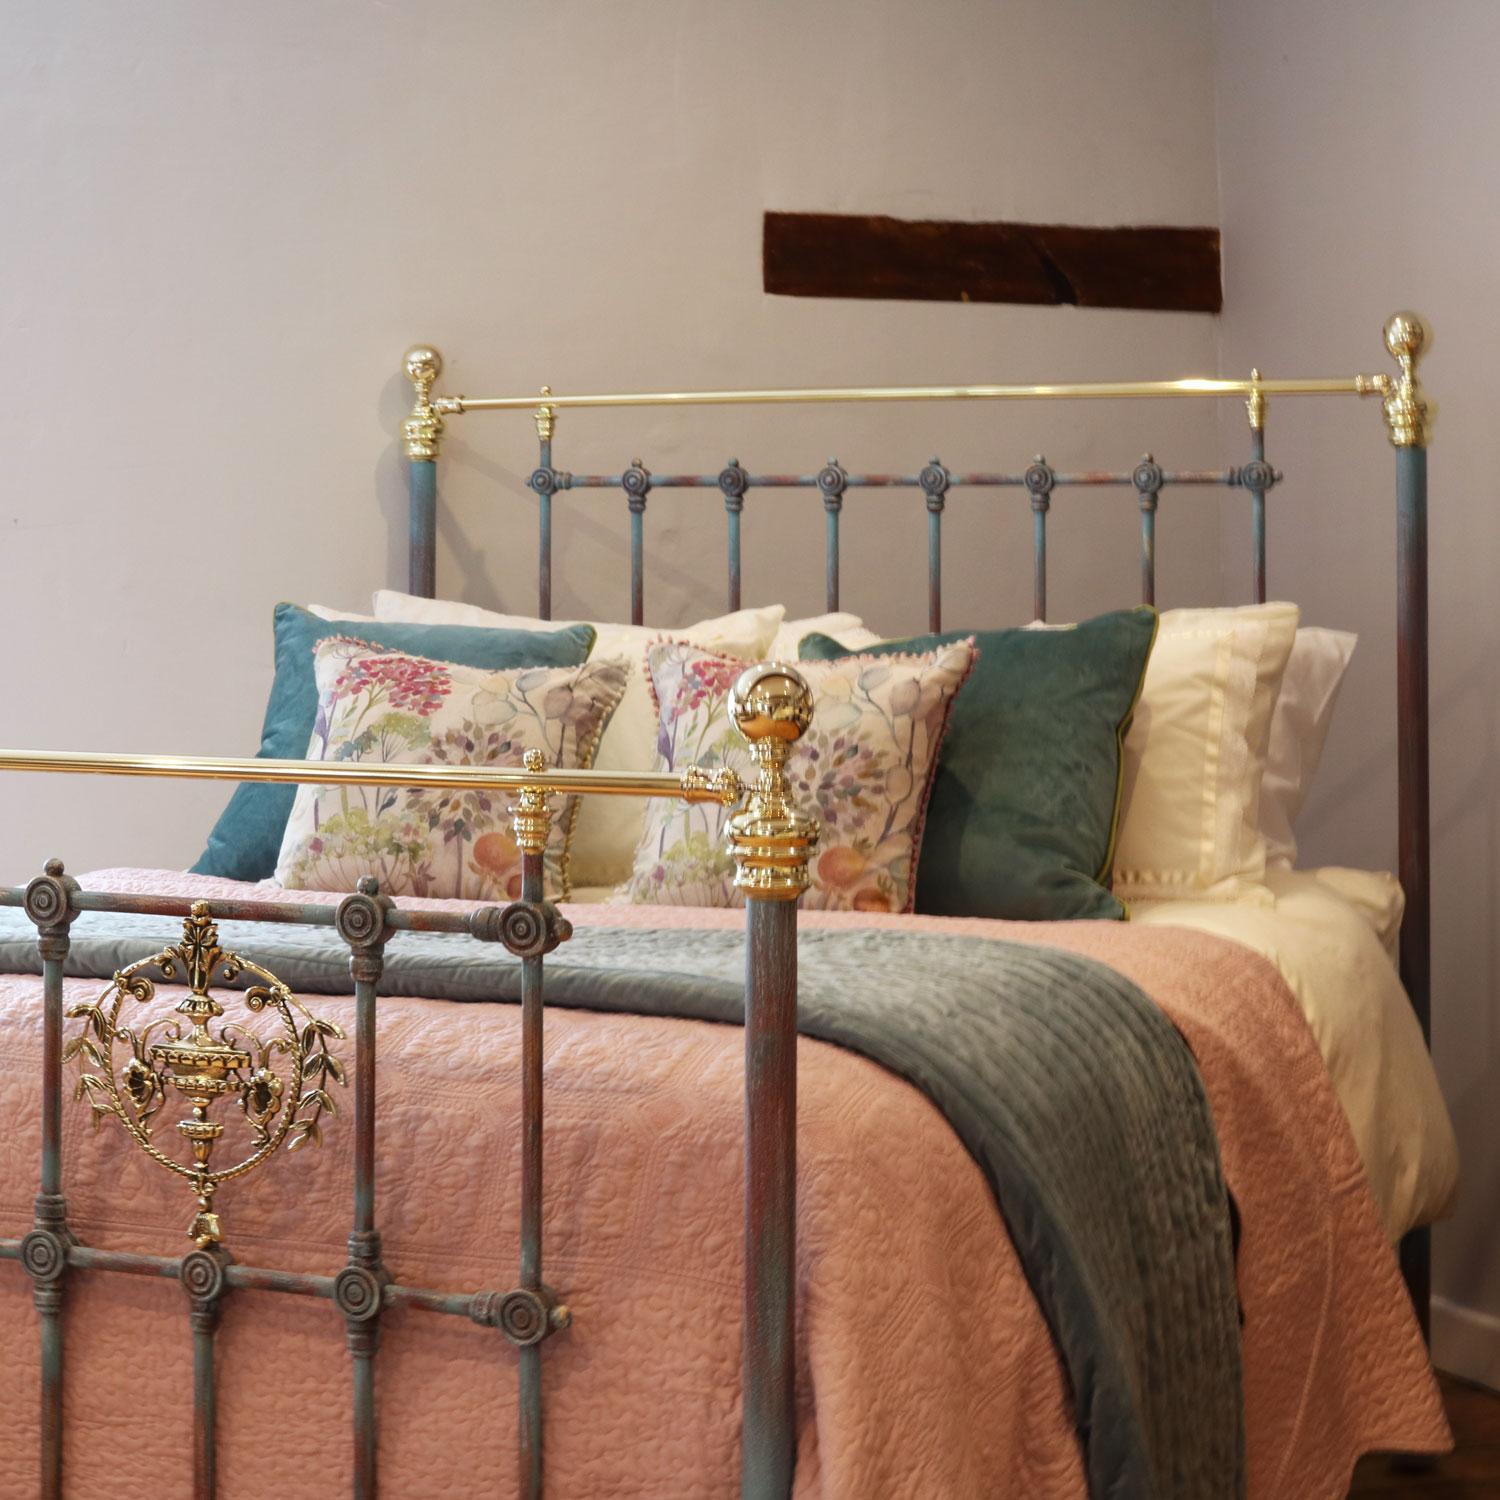 An ornate brass and iron bedstead finished in blue verdigris with large decorative brass castings in the foot panel. 

This bed accepts a UK king size or US queen size (5ft, 60in or 150cm wide) base and mattress set.

The price includes a